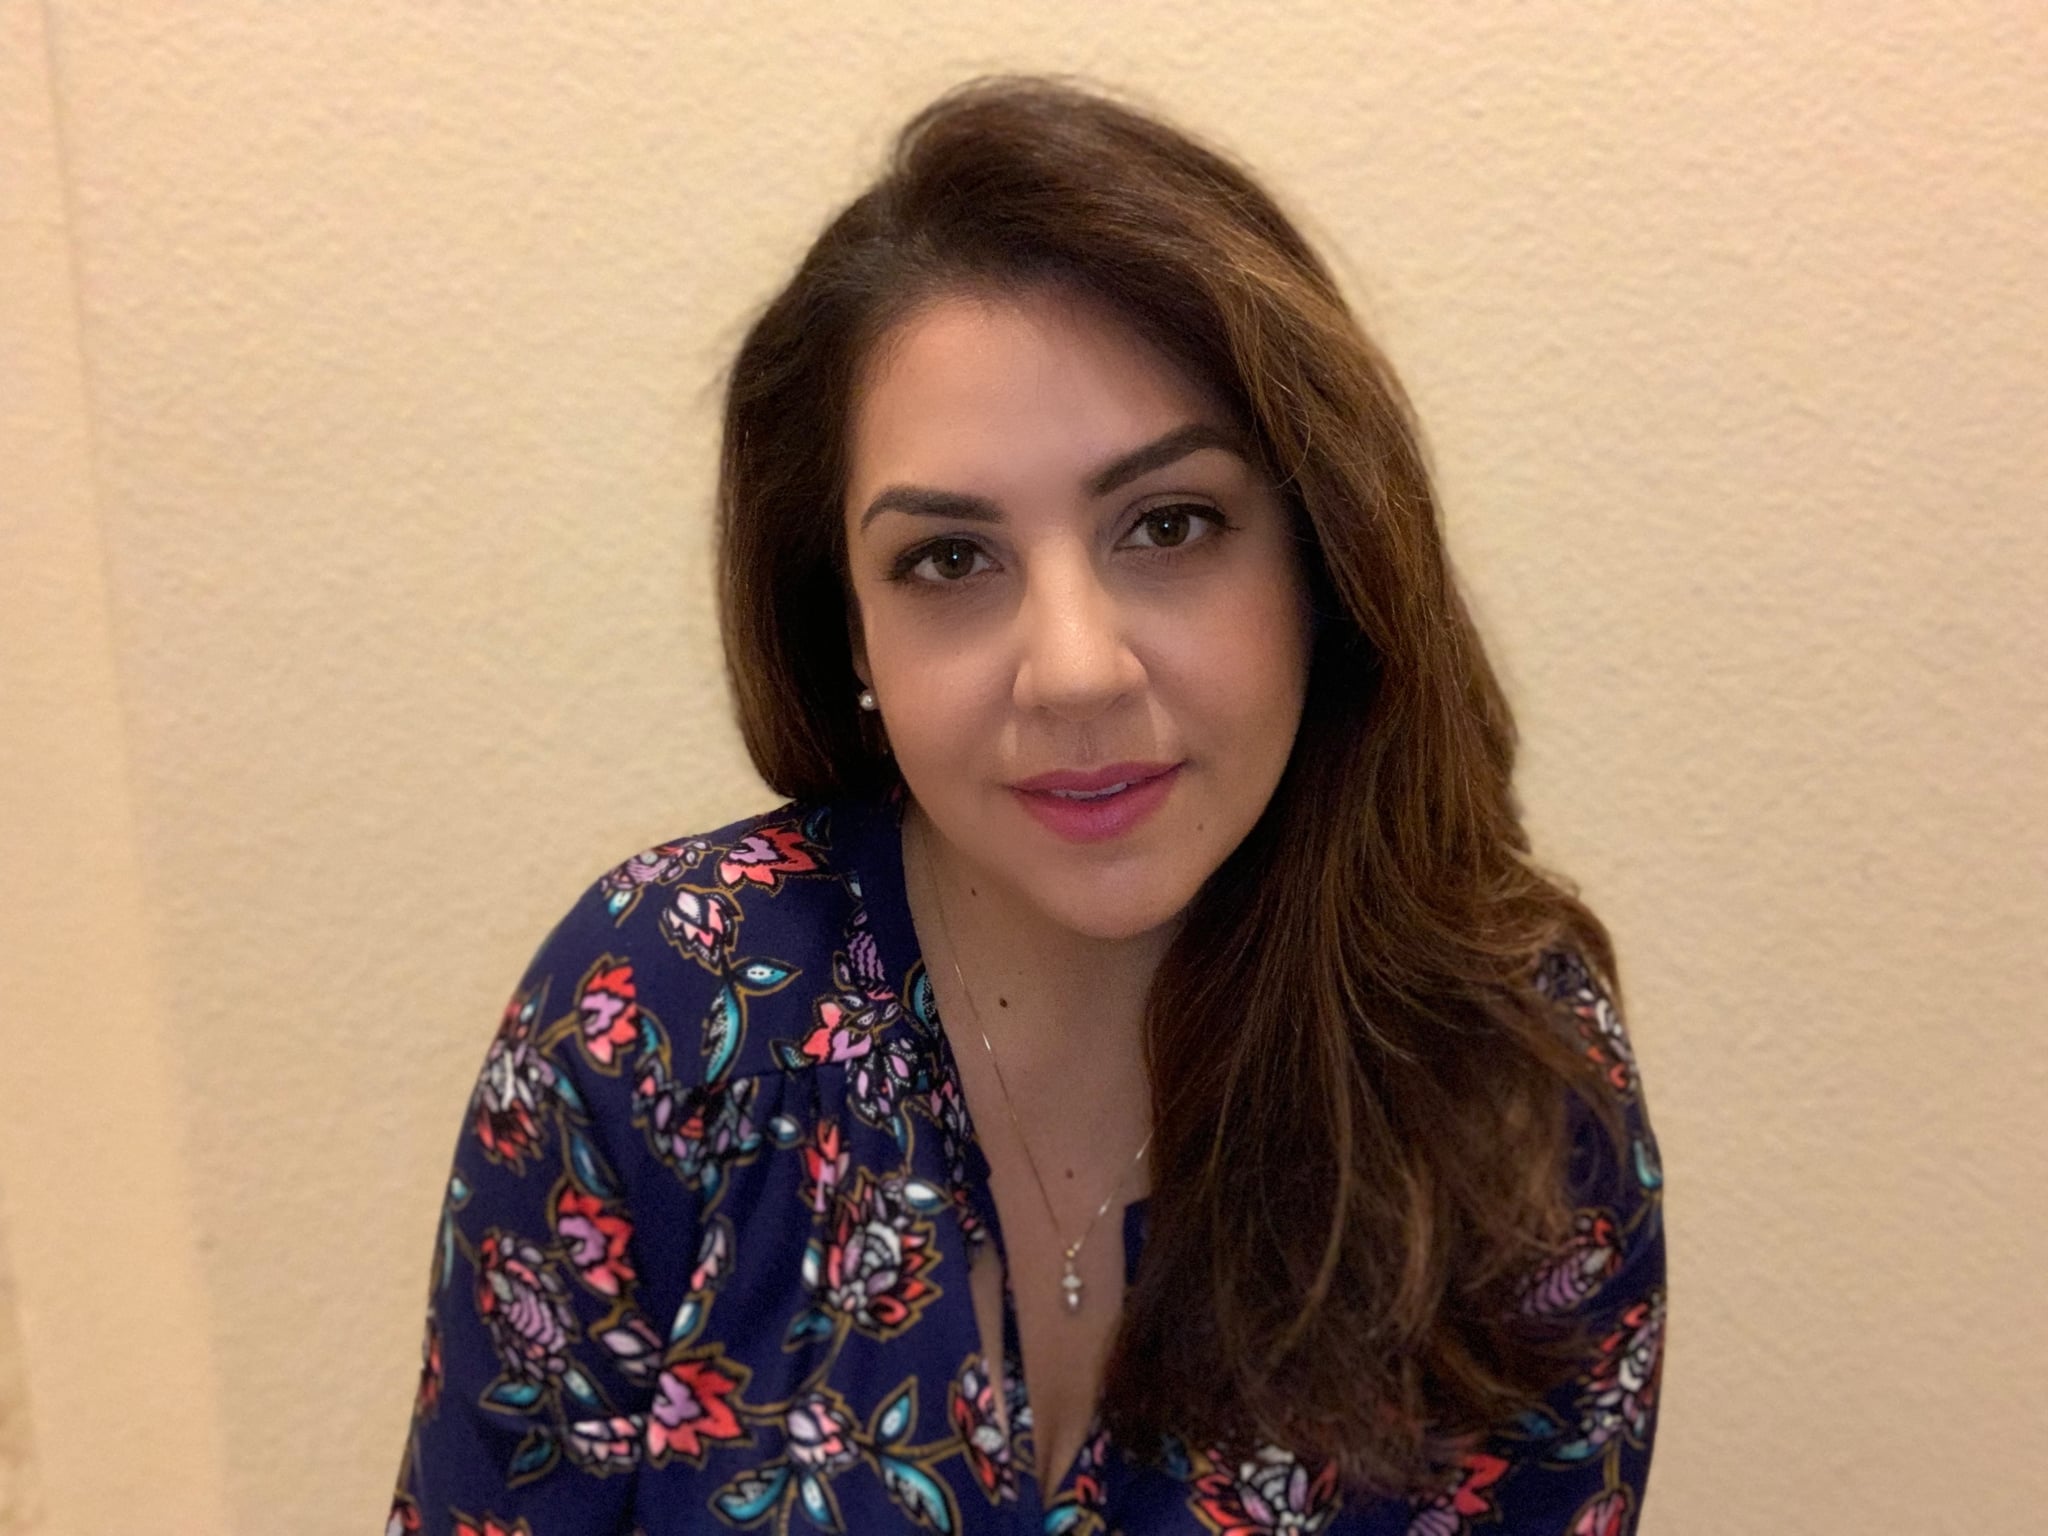 How Gisselle Bances Established the First Latinx Network at iHeartMedia